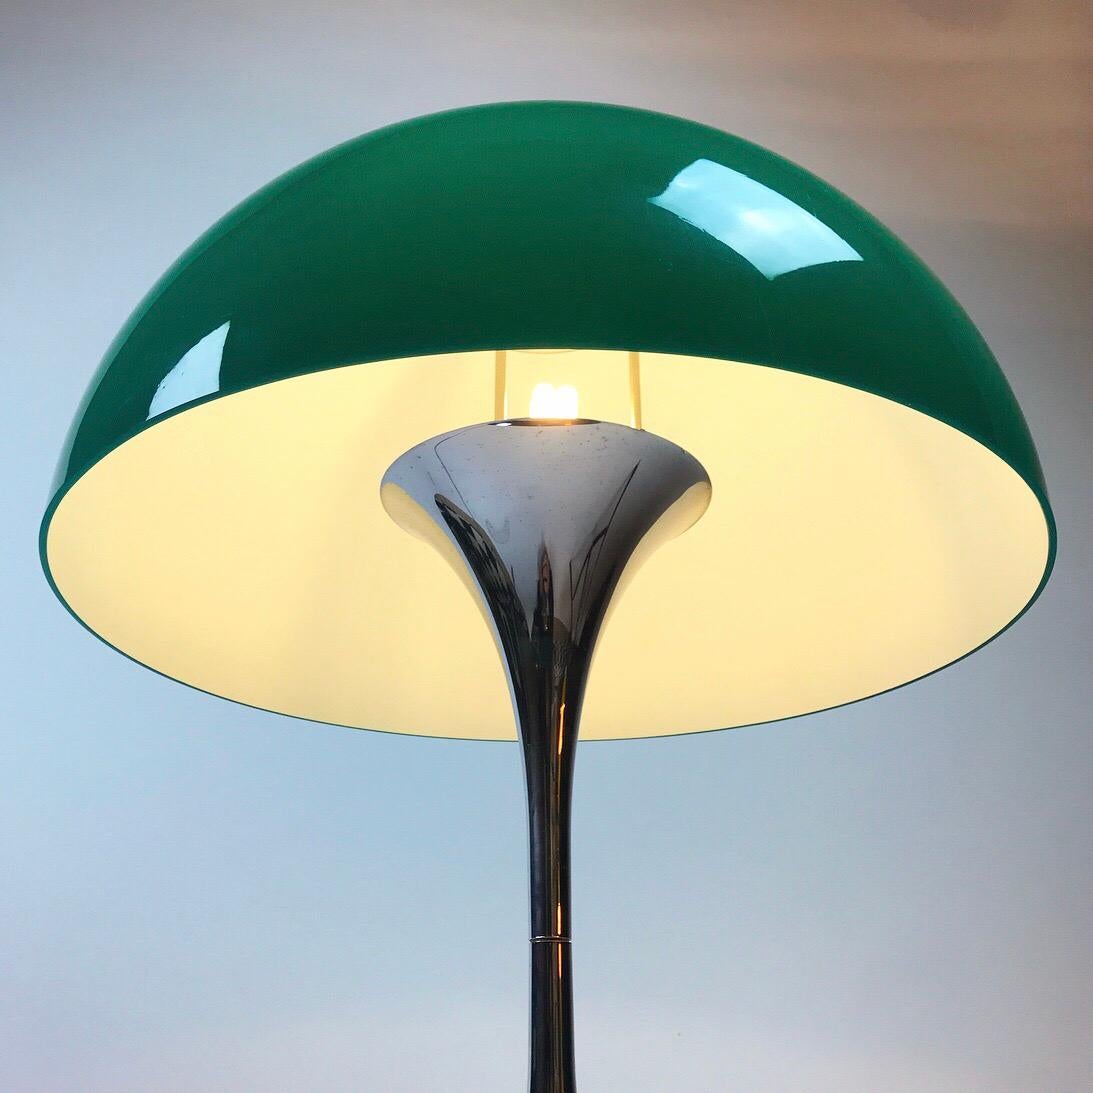 Rare chrome Panthella edition designed by Verner Panton for Louis Poulsen, Denmark.

For a short period in the beginning of the 1970s Louis Poulsen produced this beautiful contemporary Panthella chrome edition. 

Due to the rareness this light